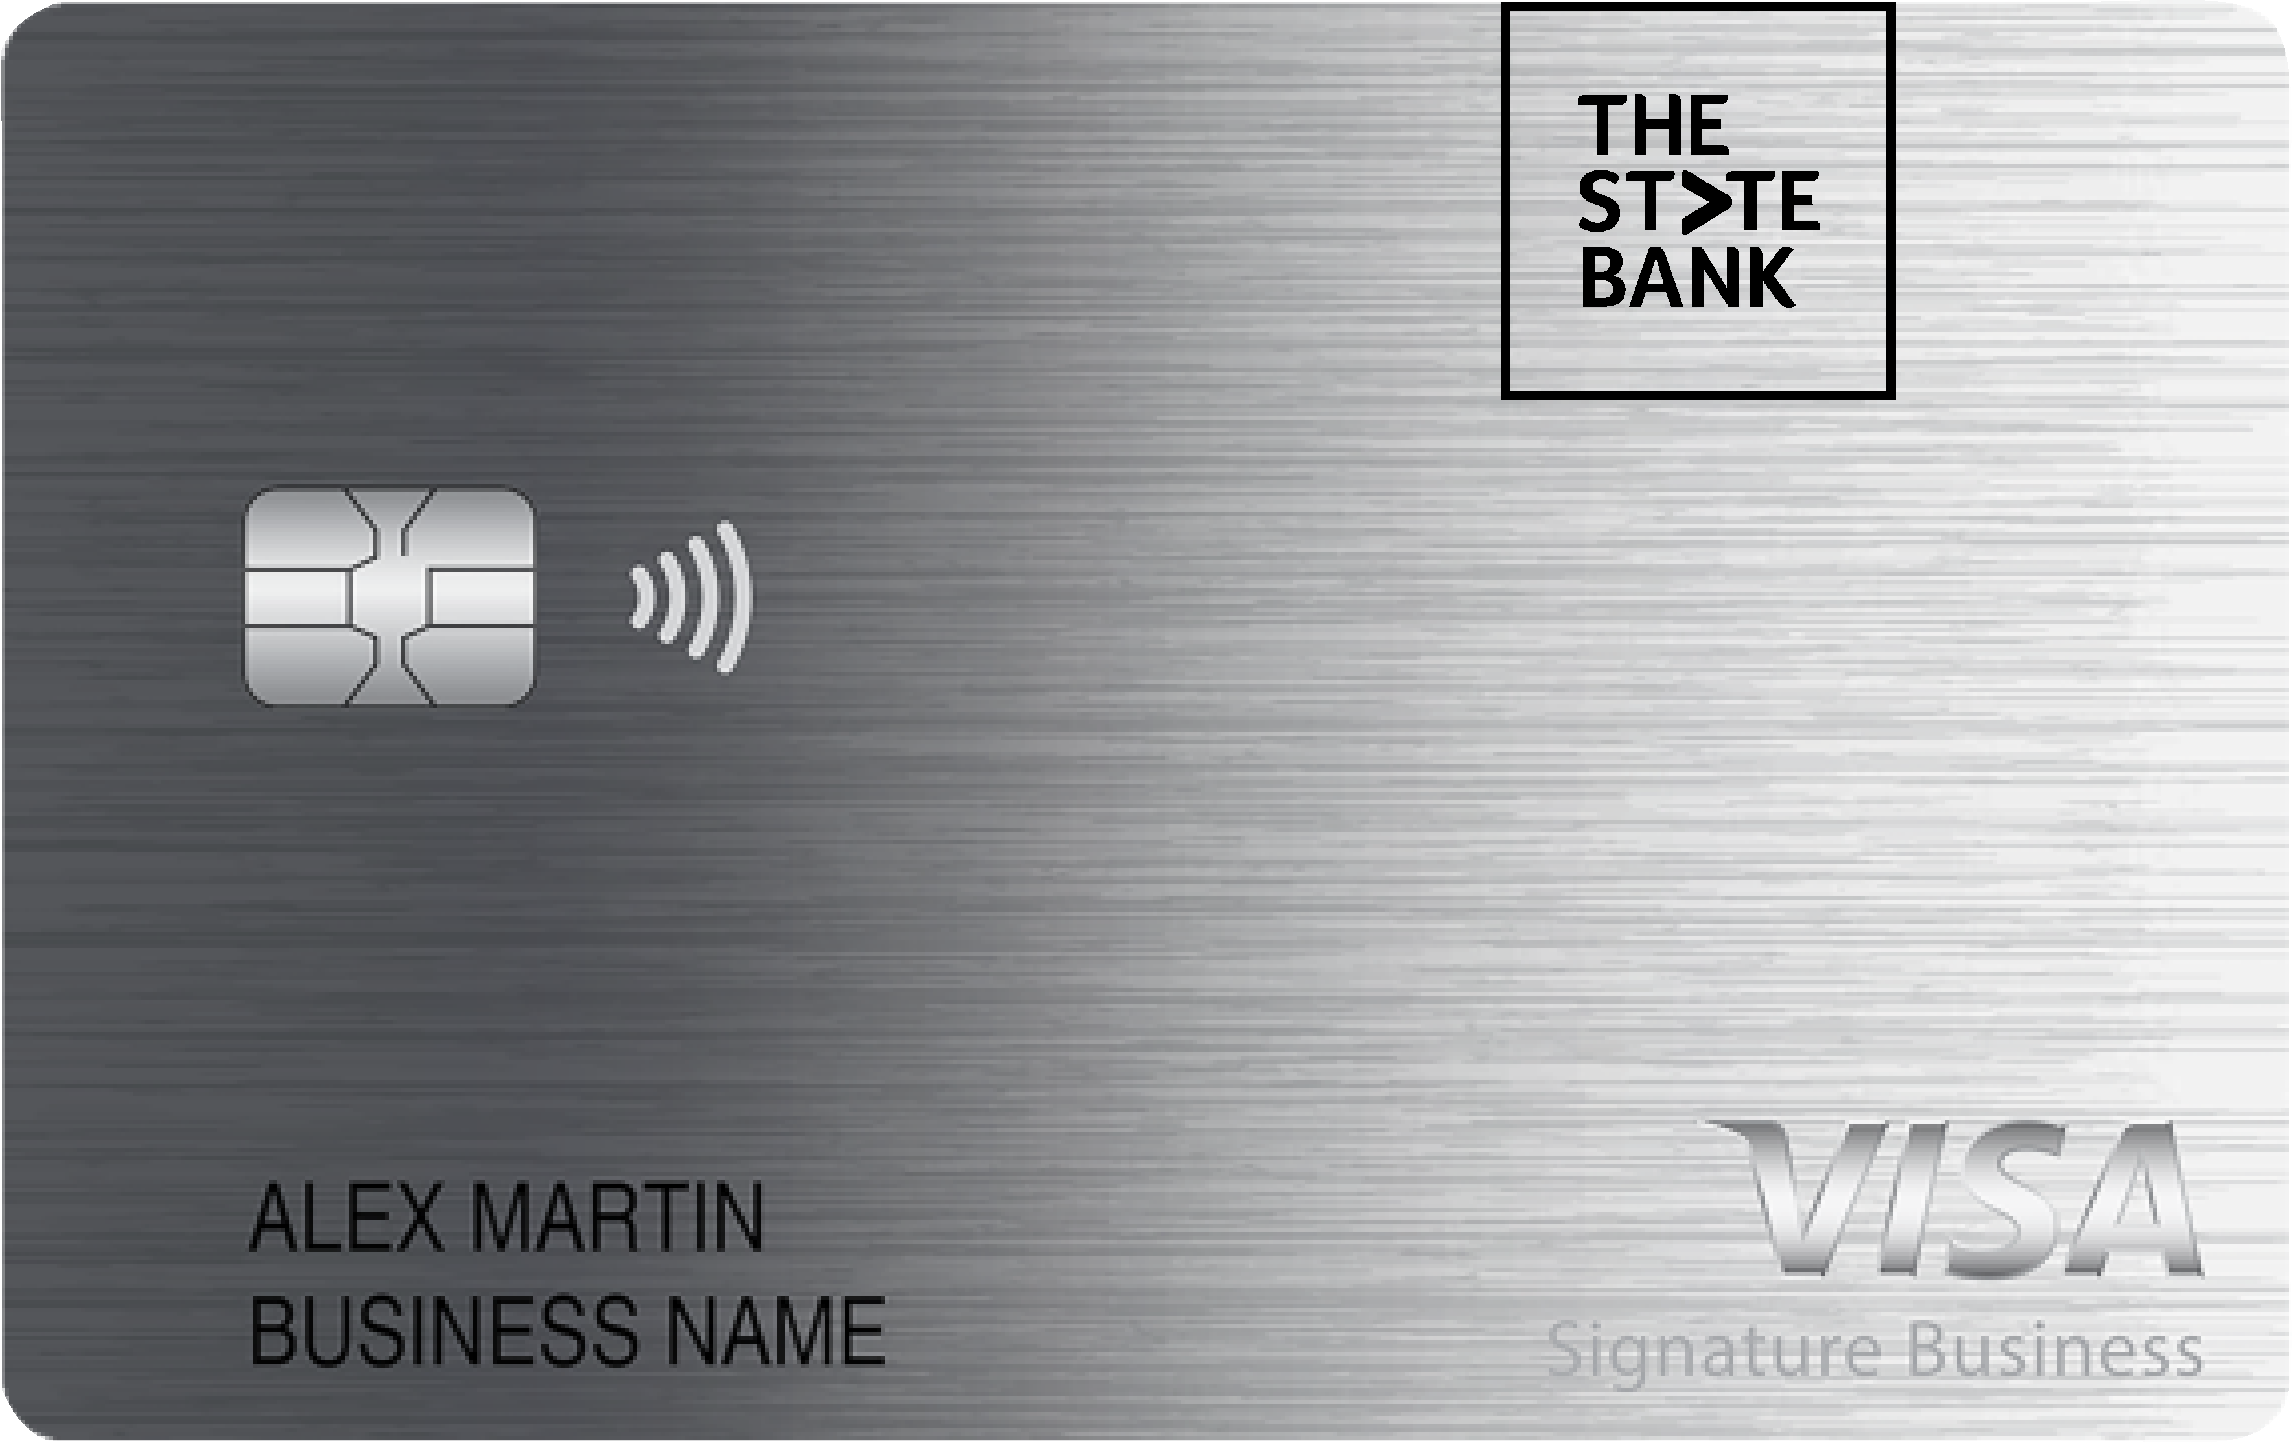 The State Bank Smart Business Rewards Card